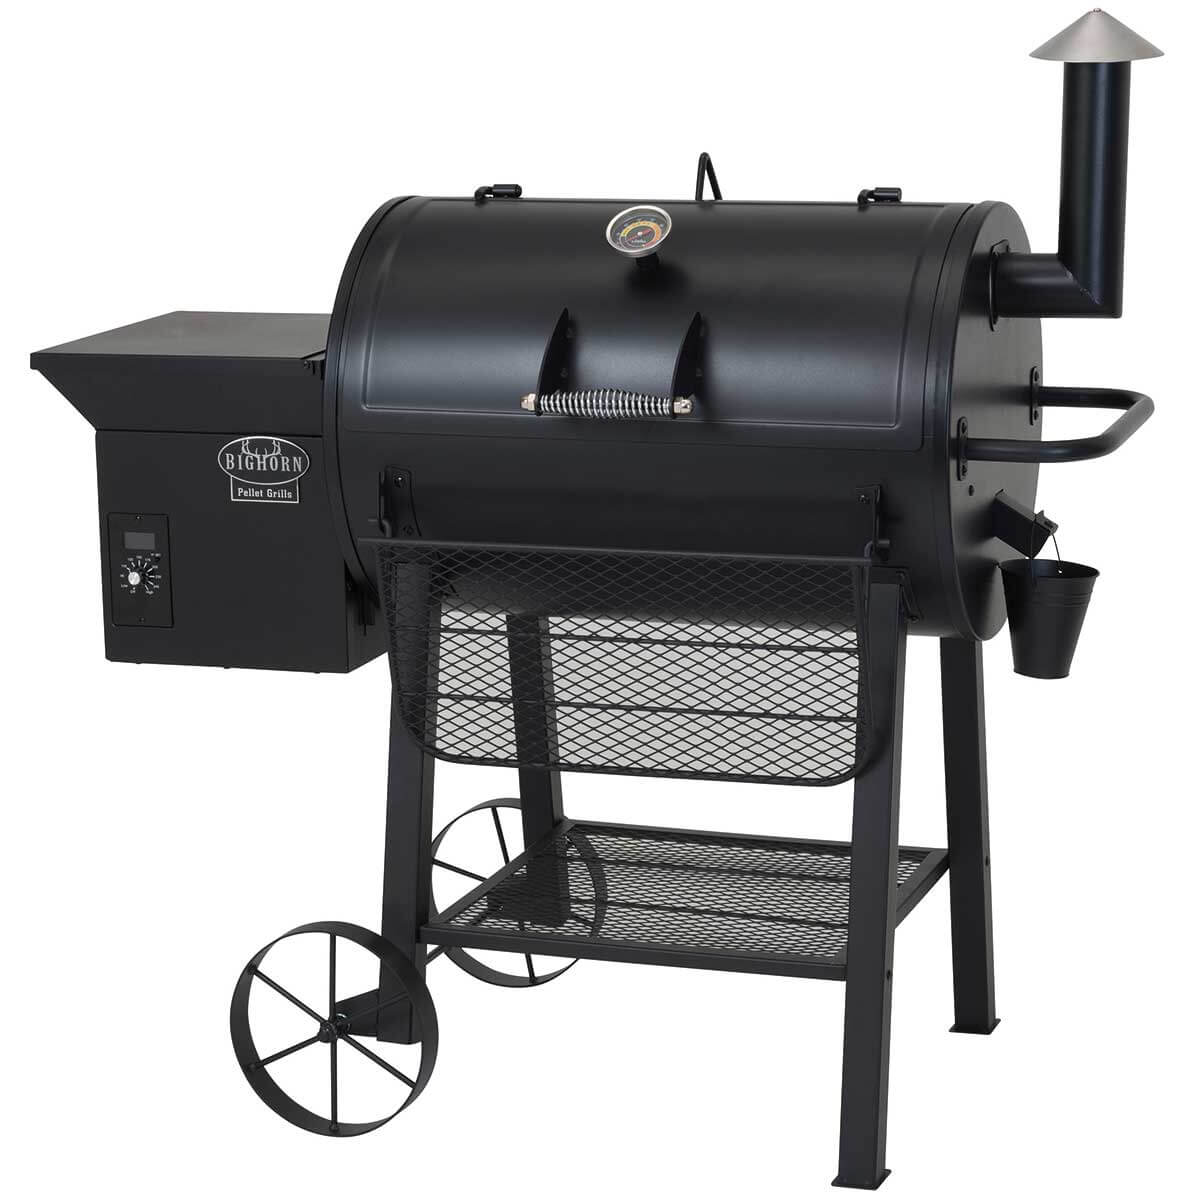 Lifestyle Big Horn Pellet Smoker and Grill - Glowing Flames